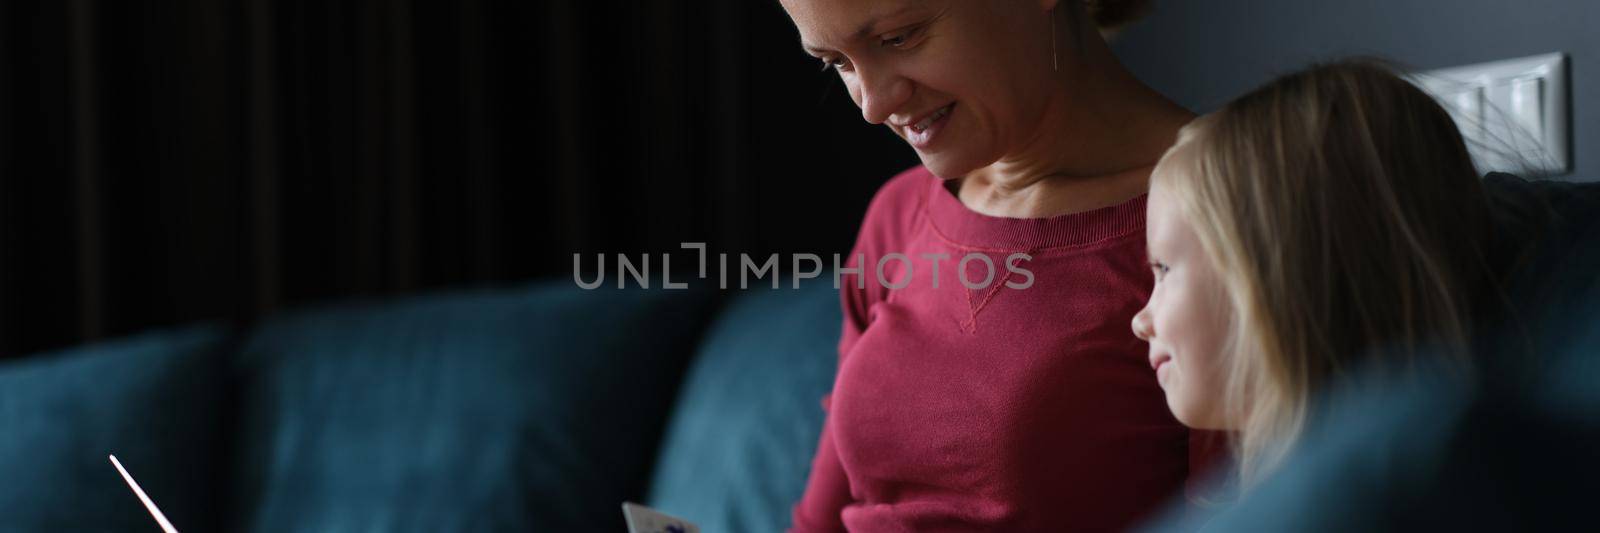 Mom with a child on the couch pays for online purchases, by kuprevich